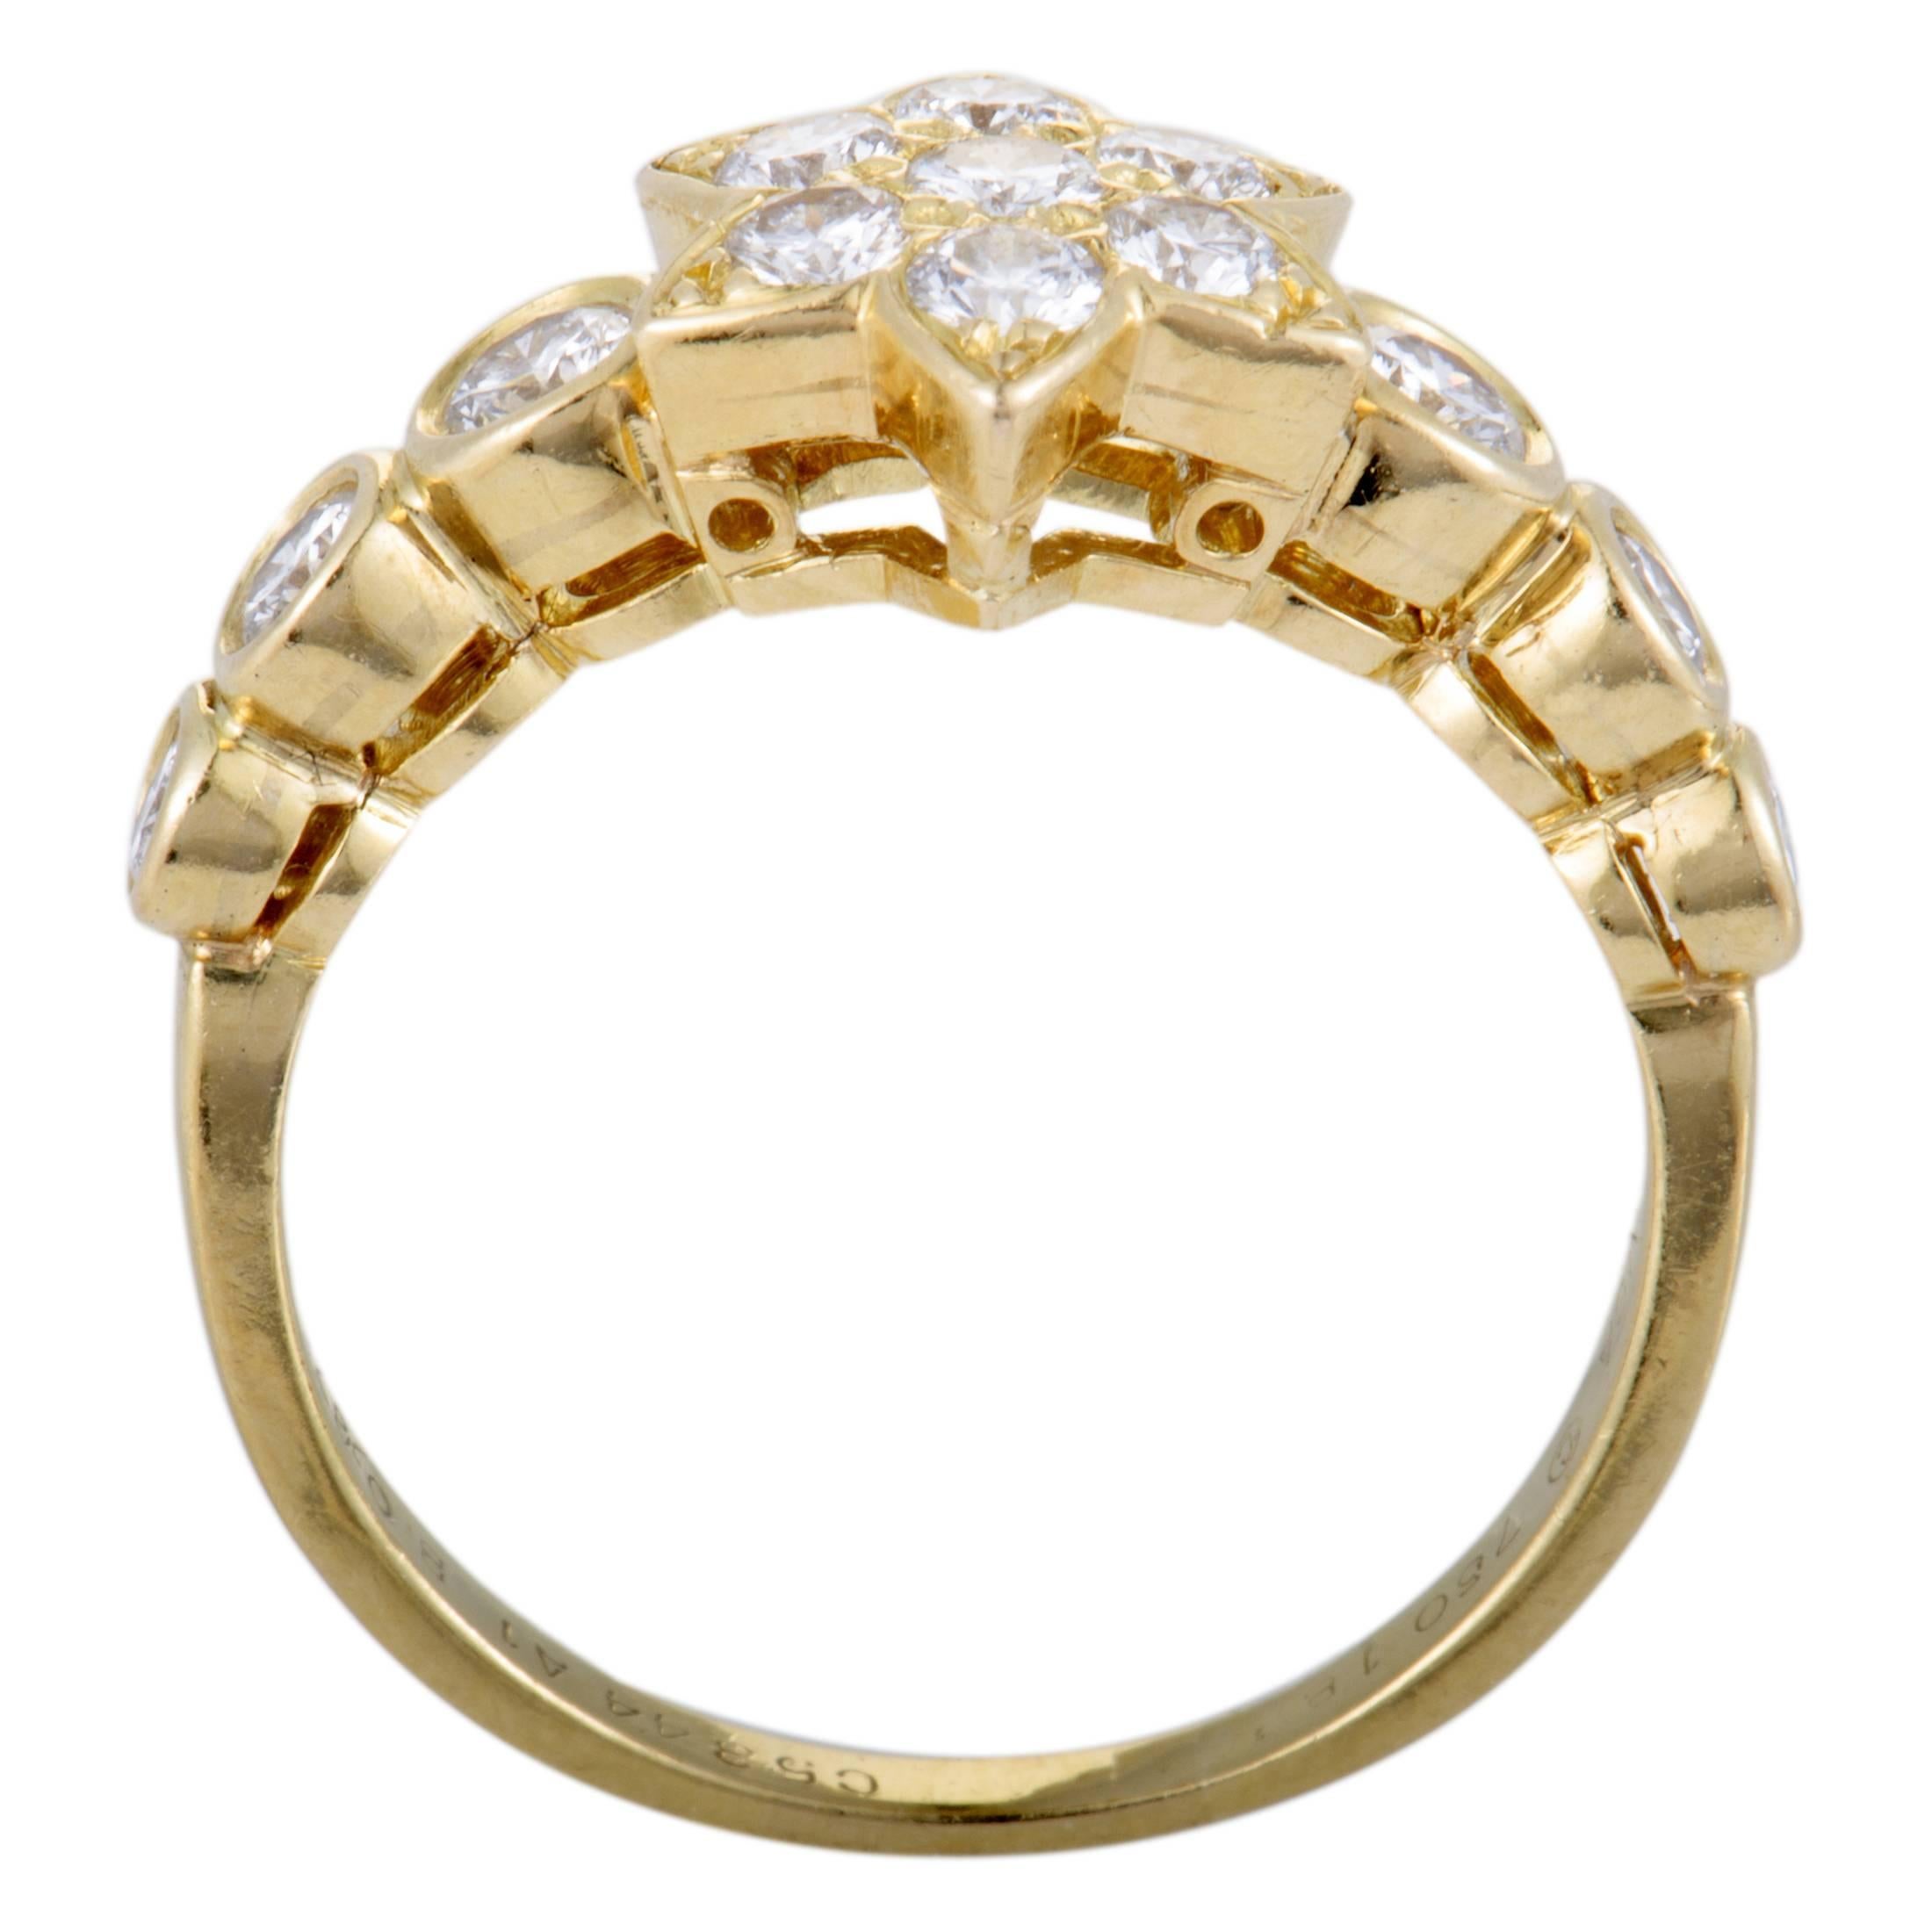 This fascinating vintage floral ring by Van Cleef & Arpels is an item of prestigious quality and refined aesthetic style. The fabulous shimmer of 18K yellow gold in its design is perfectly complemented with the timeless resplendence of F-color,